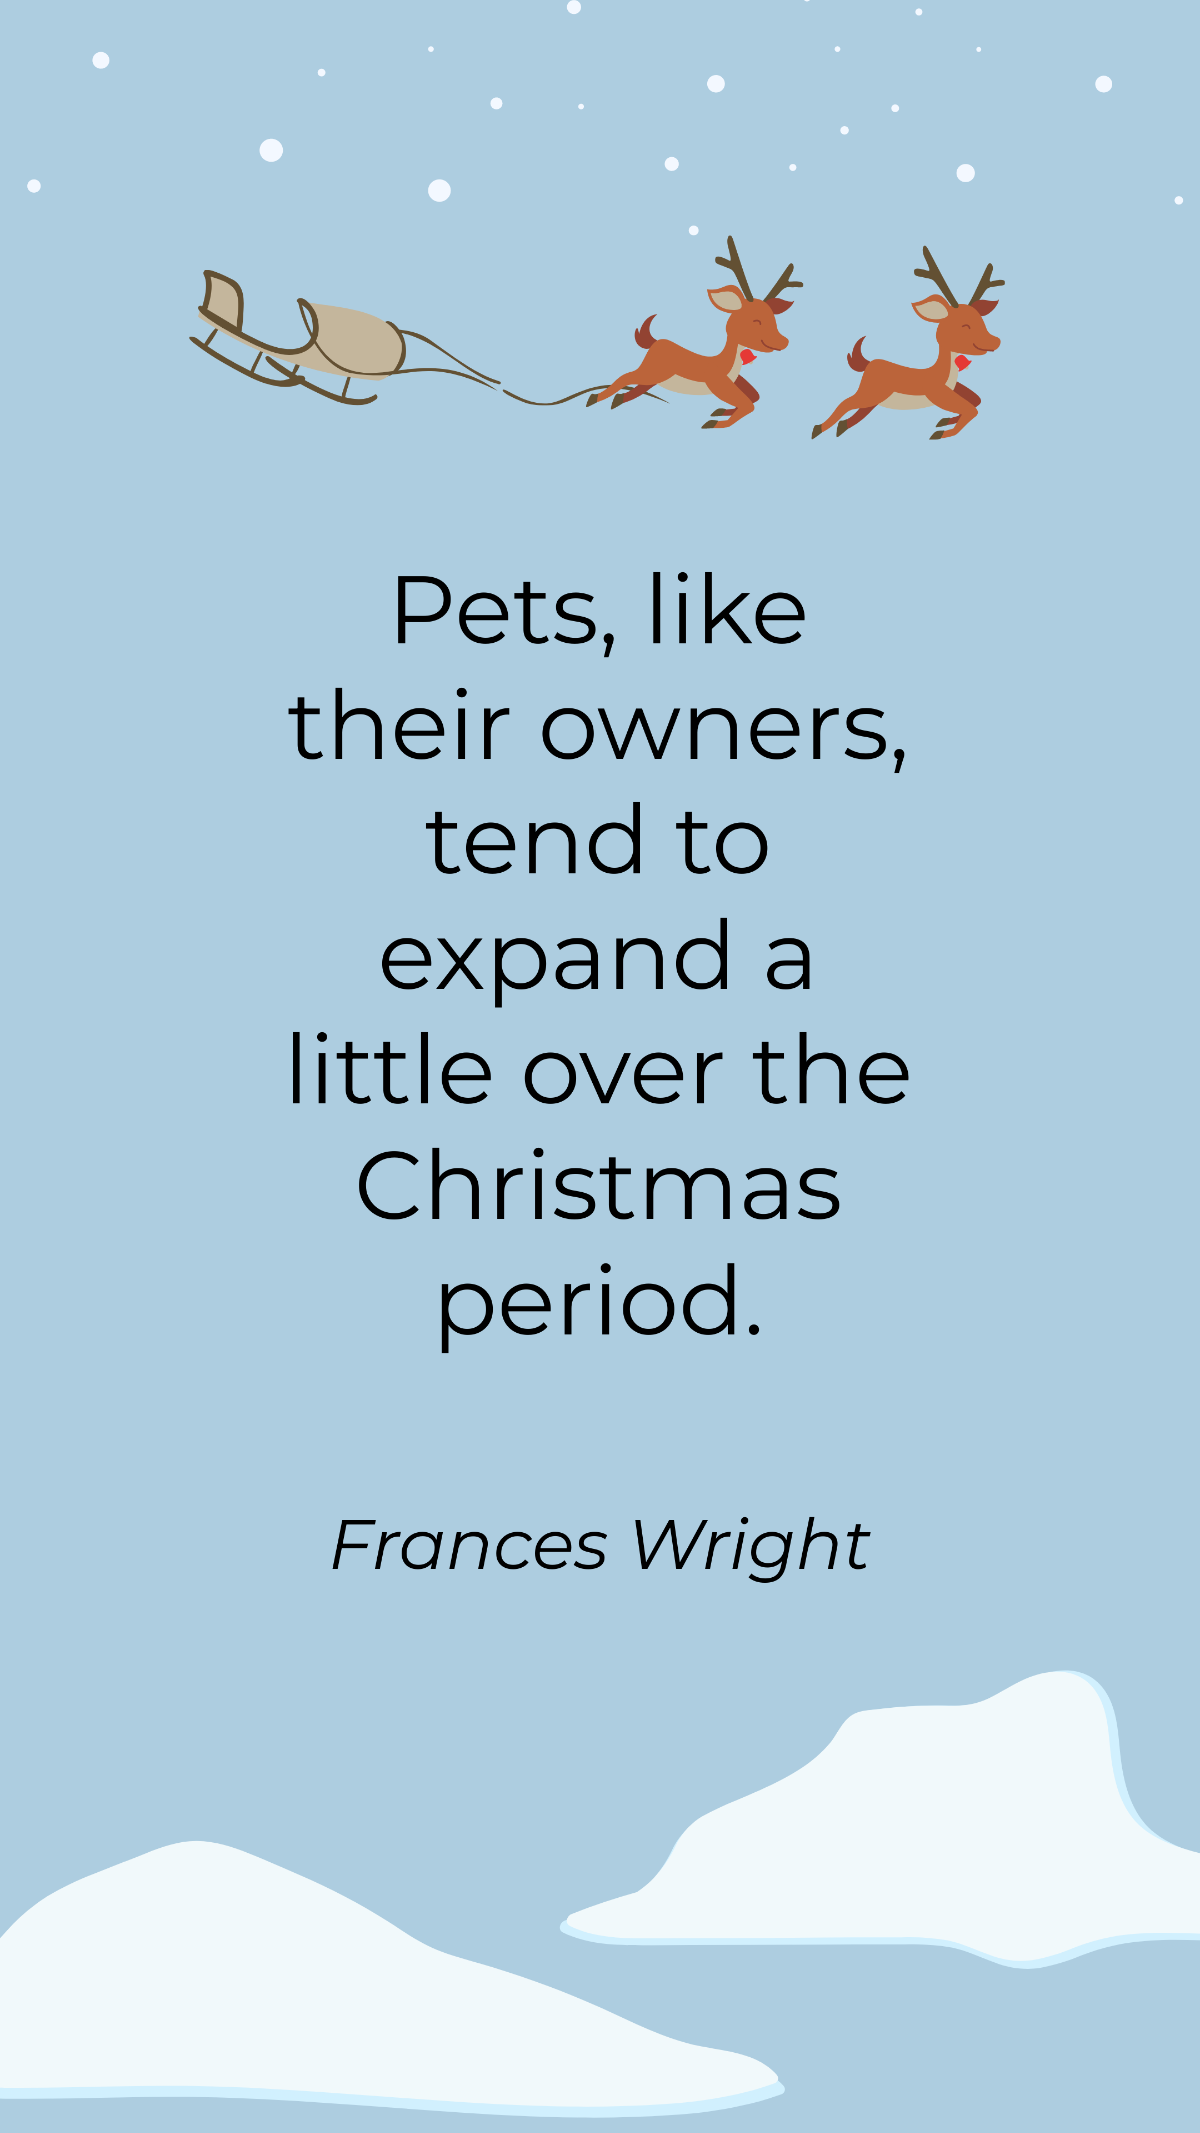 Frances Wright - Pets, like their owners, tend to expand a little over the Christmas period. Template